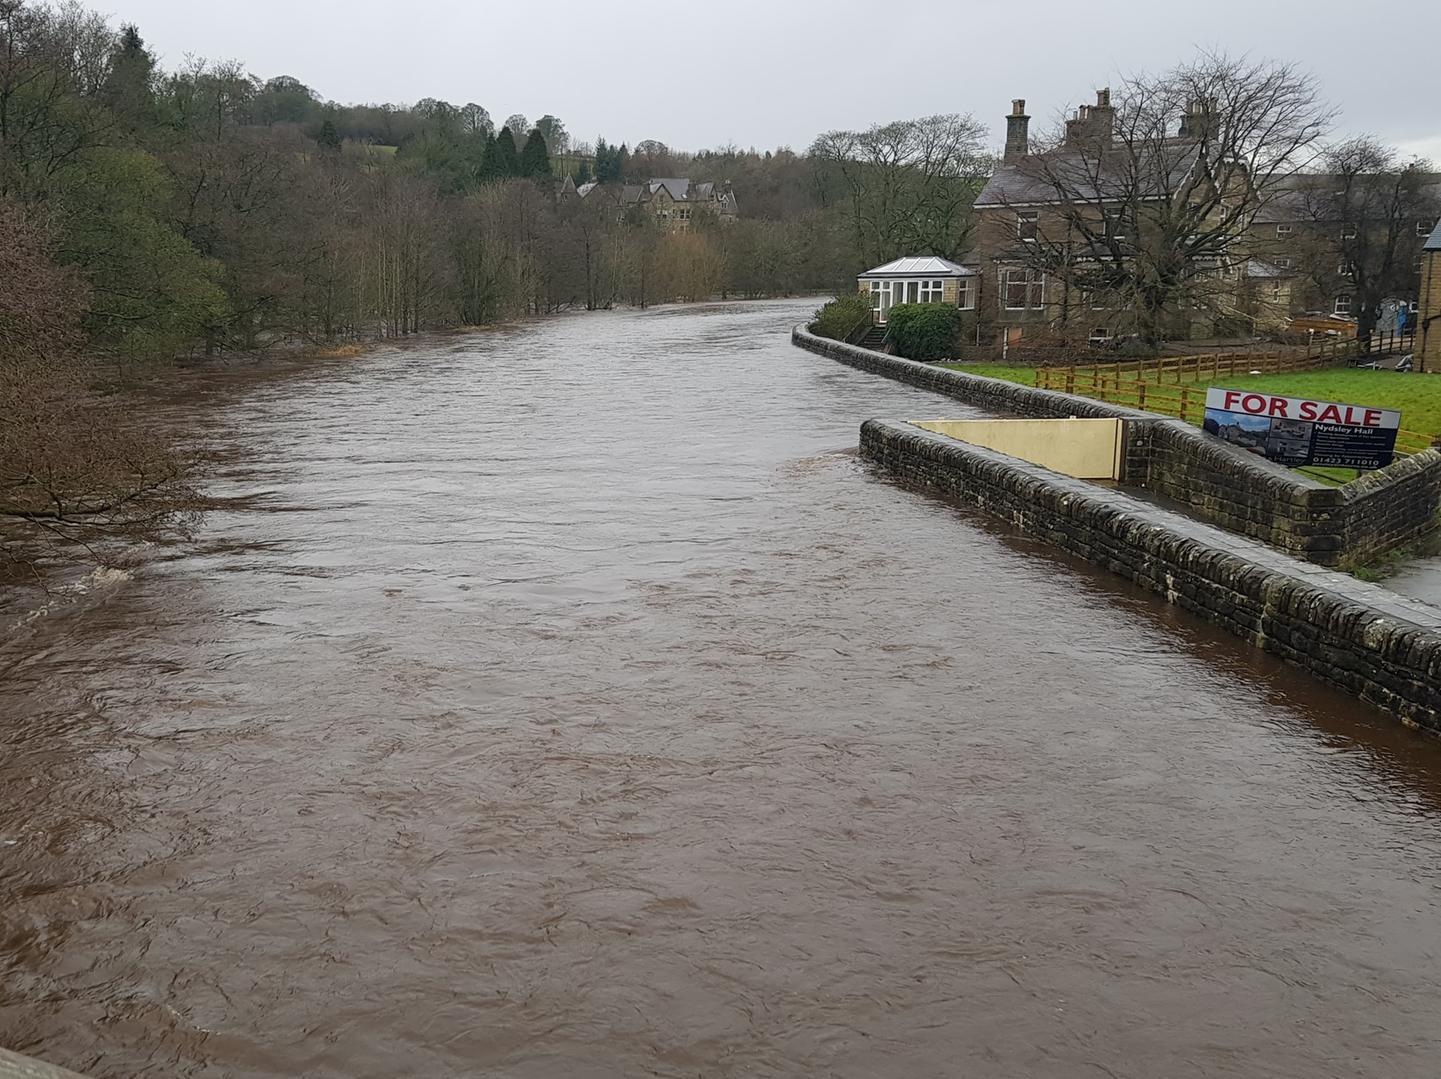 A severe flood warning was in place for Pateley Bridge for most of the day, before it was downgraded.